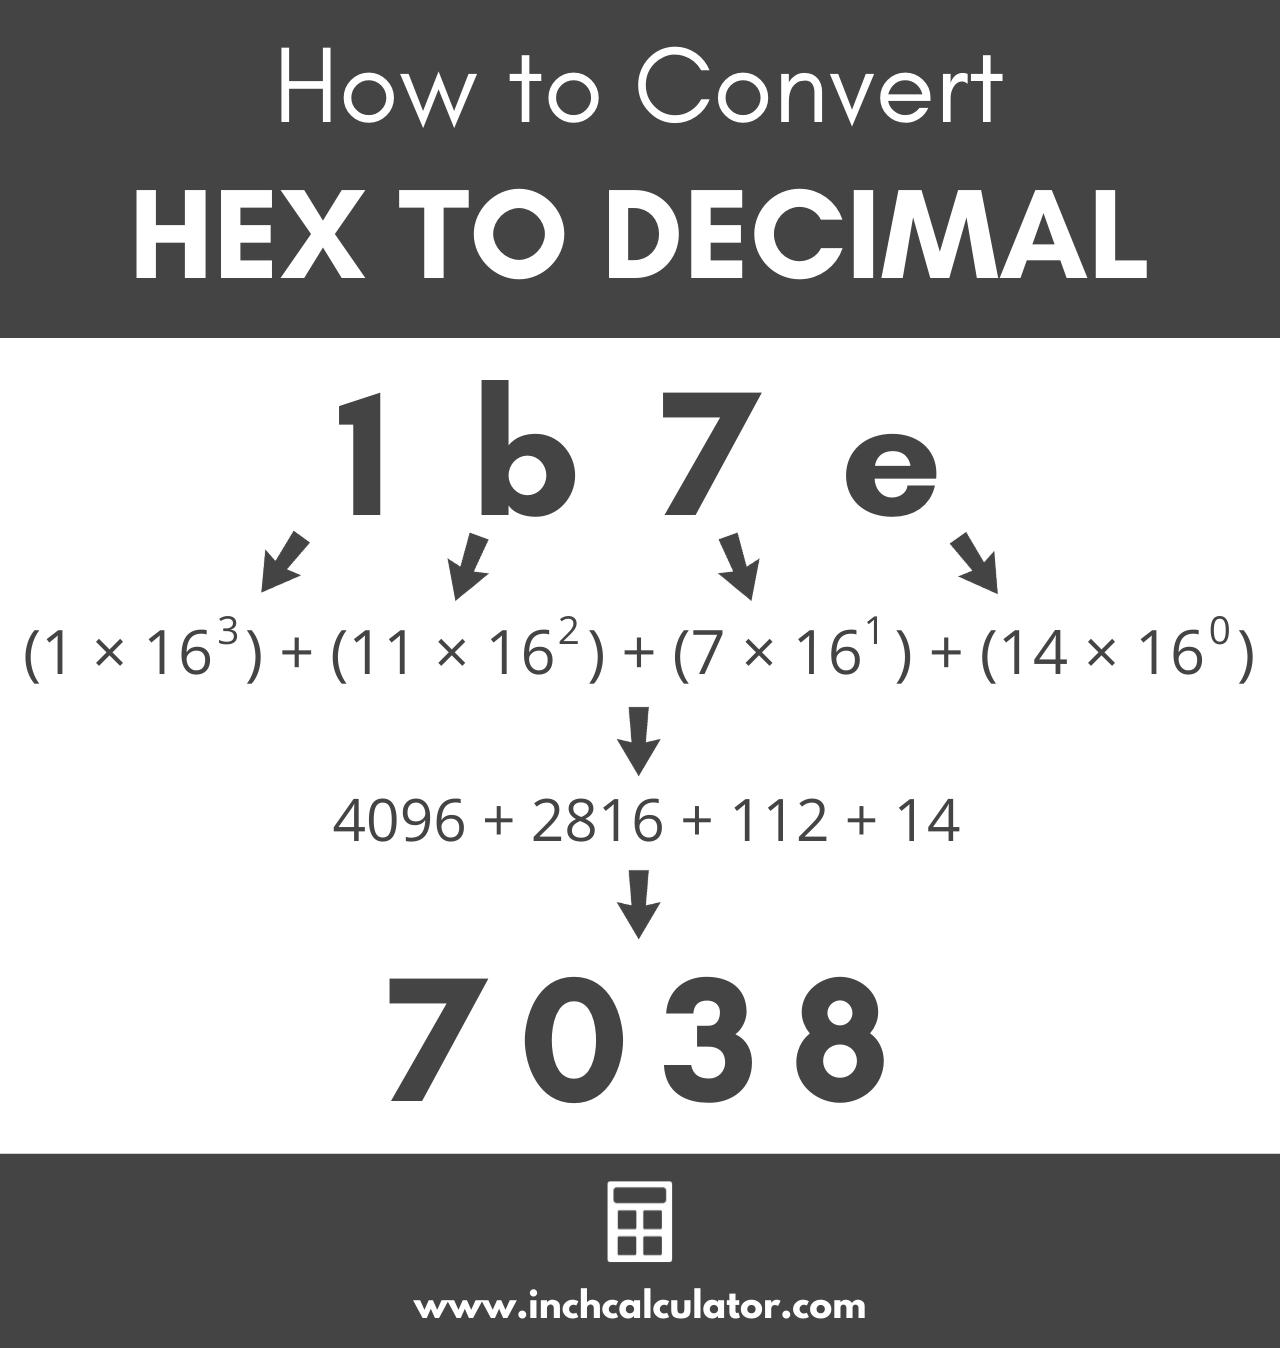 graphic showing how to convert a hex number to decimal